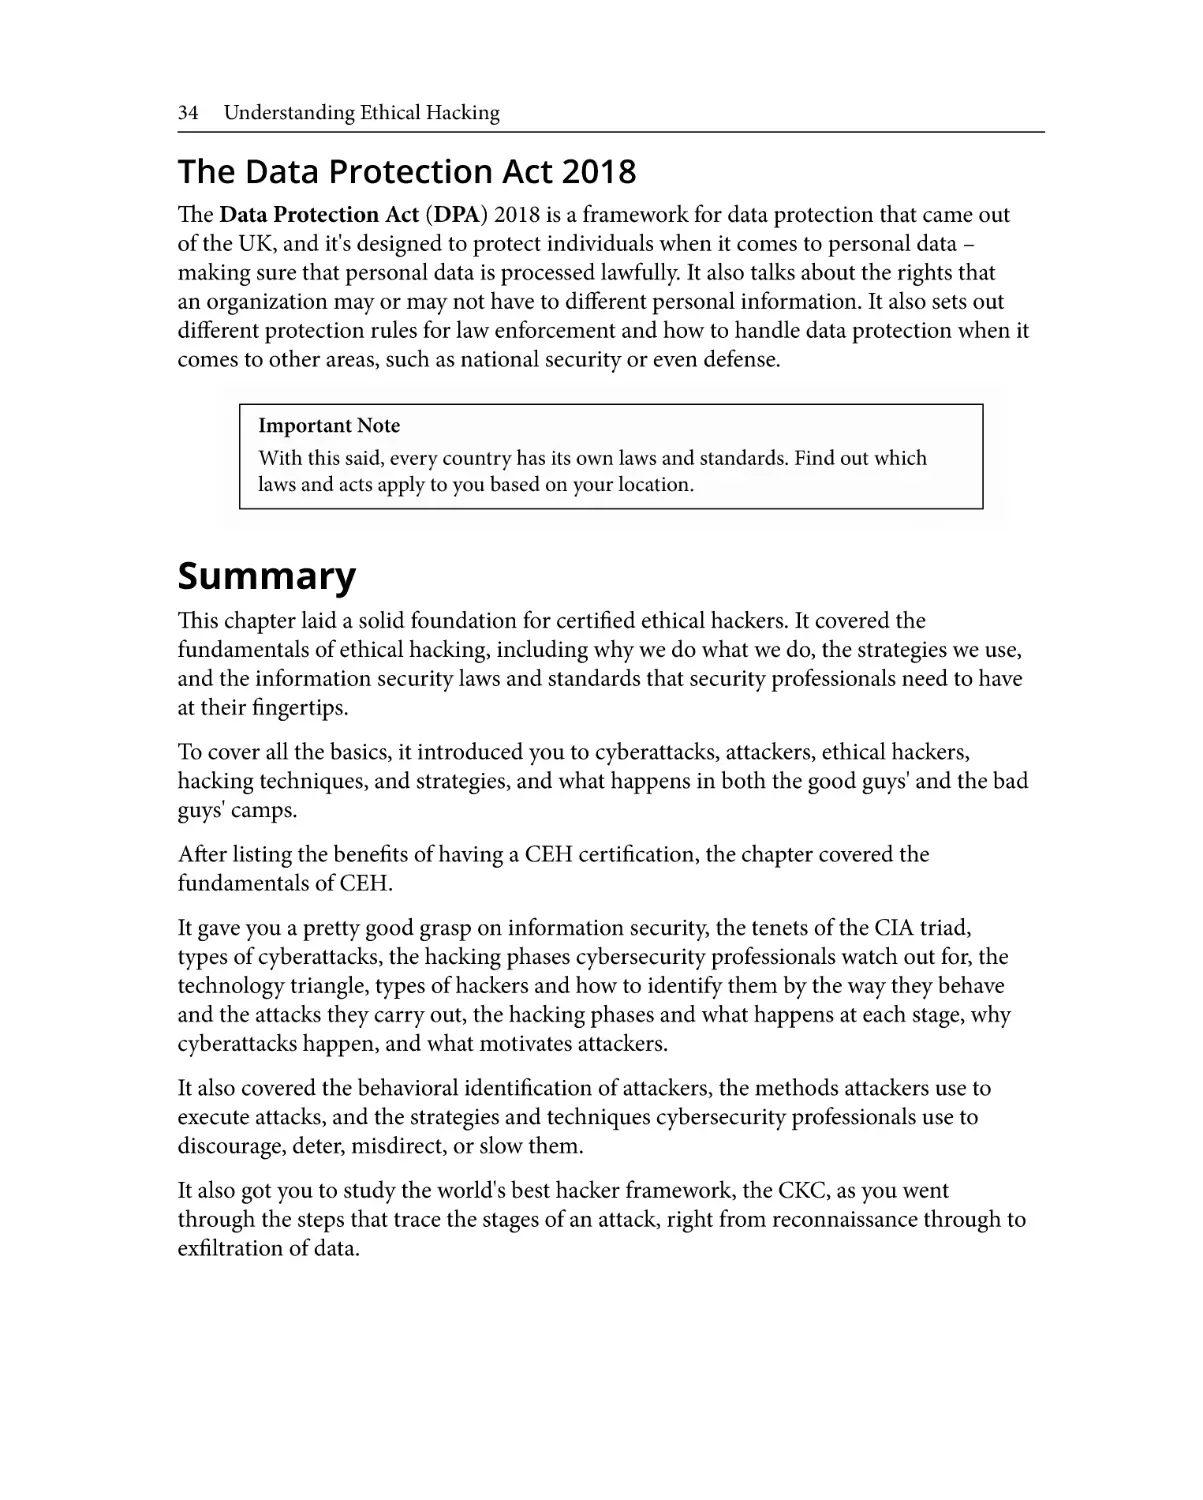 The Data Protection Act 2018
Summary